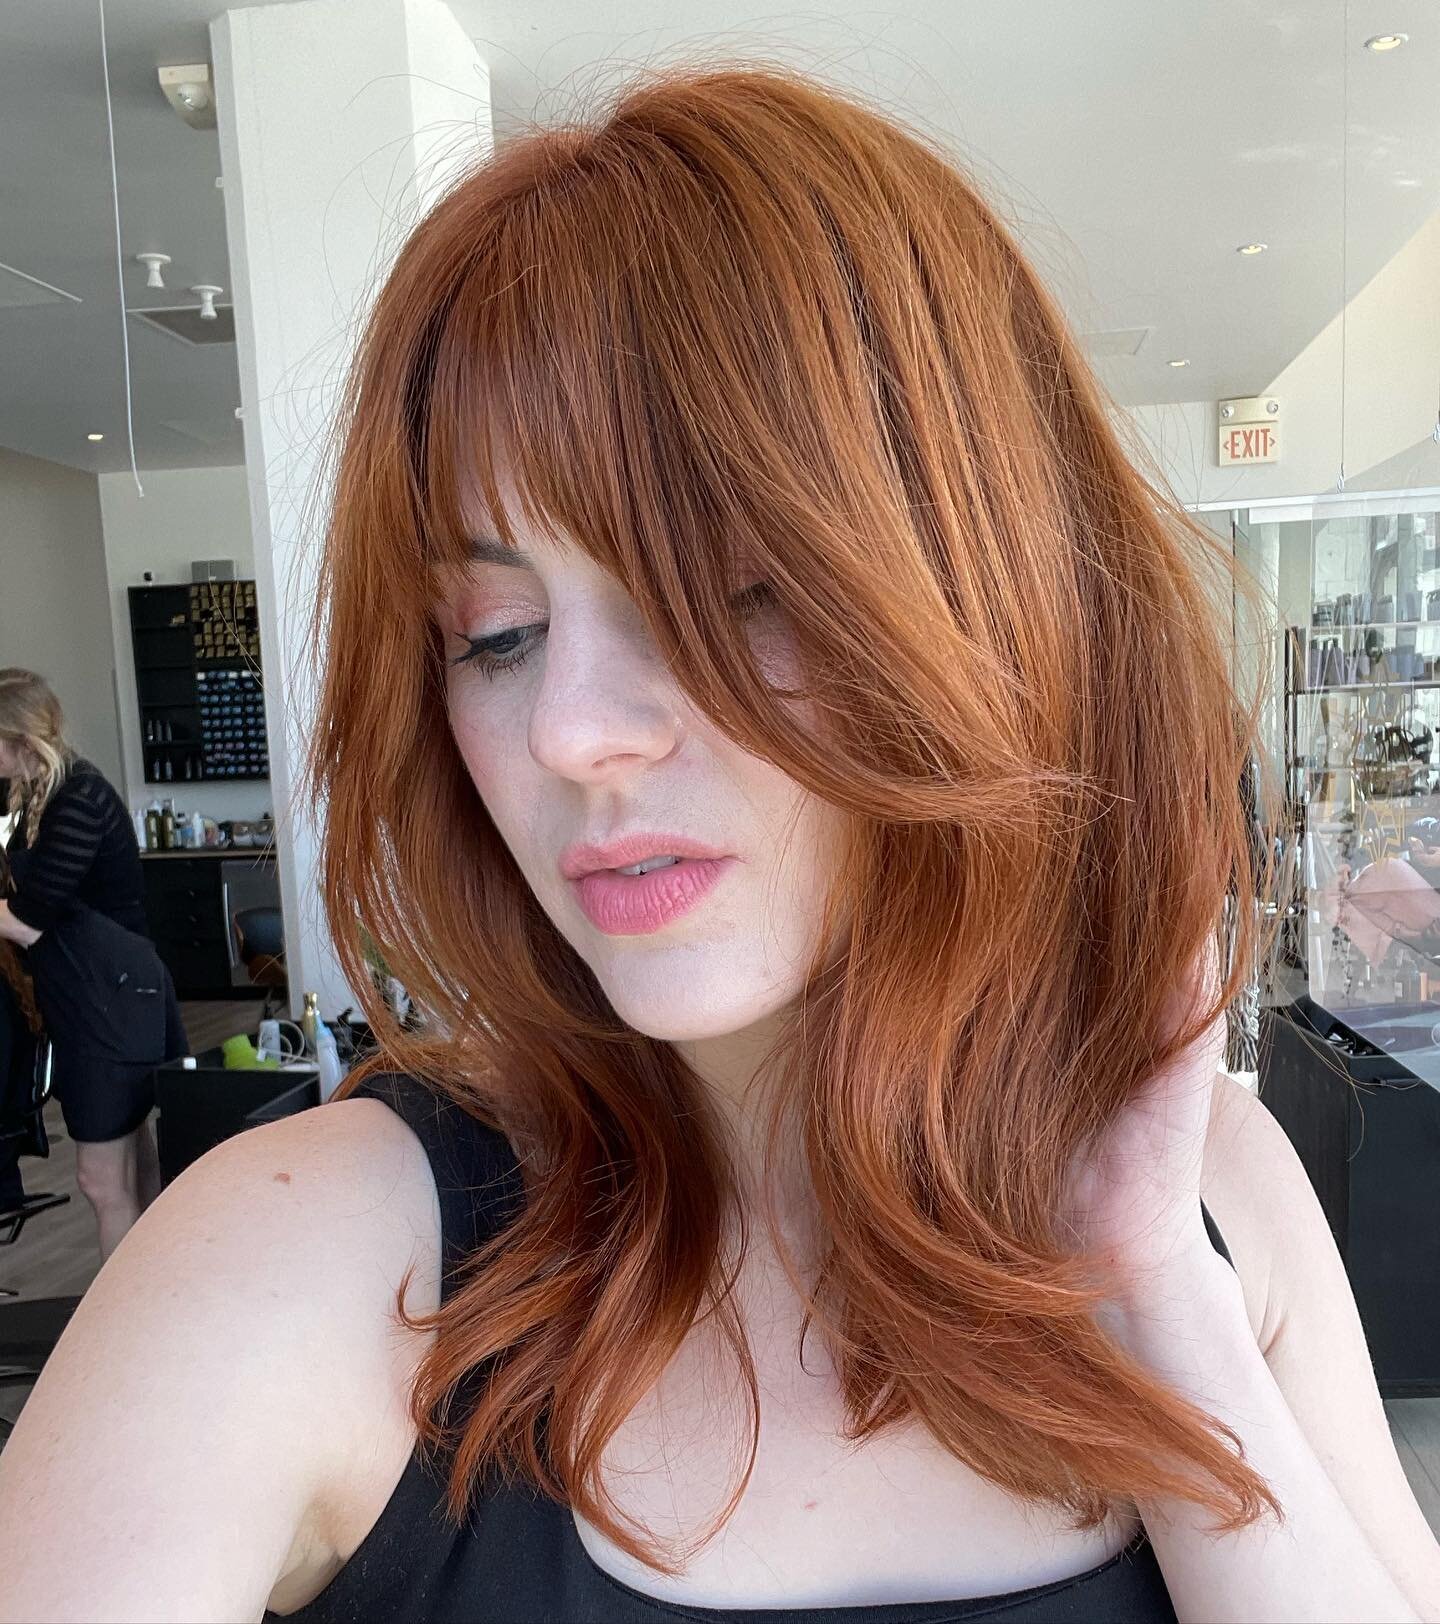 &ldquo;I love those redheads, man&rdquo; - name who said this famous quote 
🎥color by @meticulous_margie using @goldwellus color at our crossroads location 
🍿model @callofthestyled